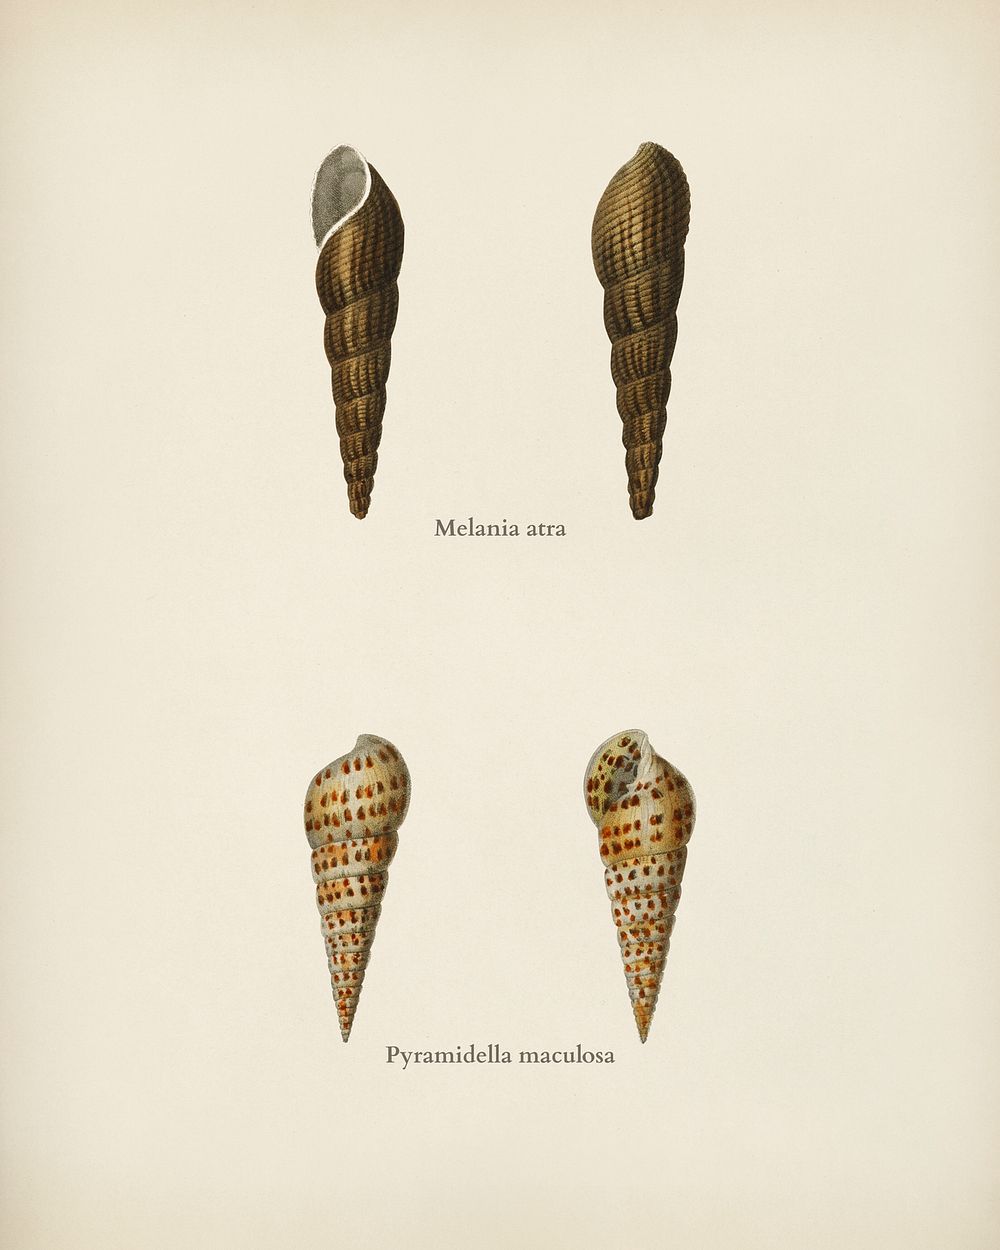 Melania atra and Pyramidella maculosa illustrated by Charles Dessalines D' Orbigny (1806-1876). Digitally enhanced from our…